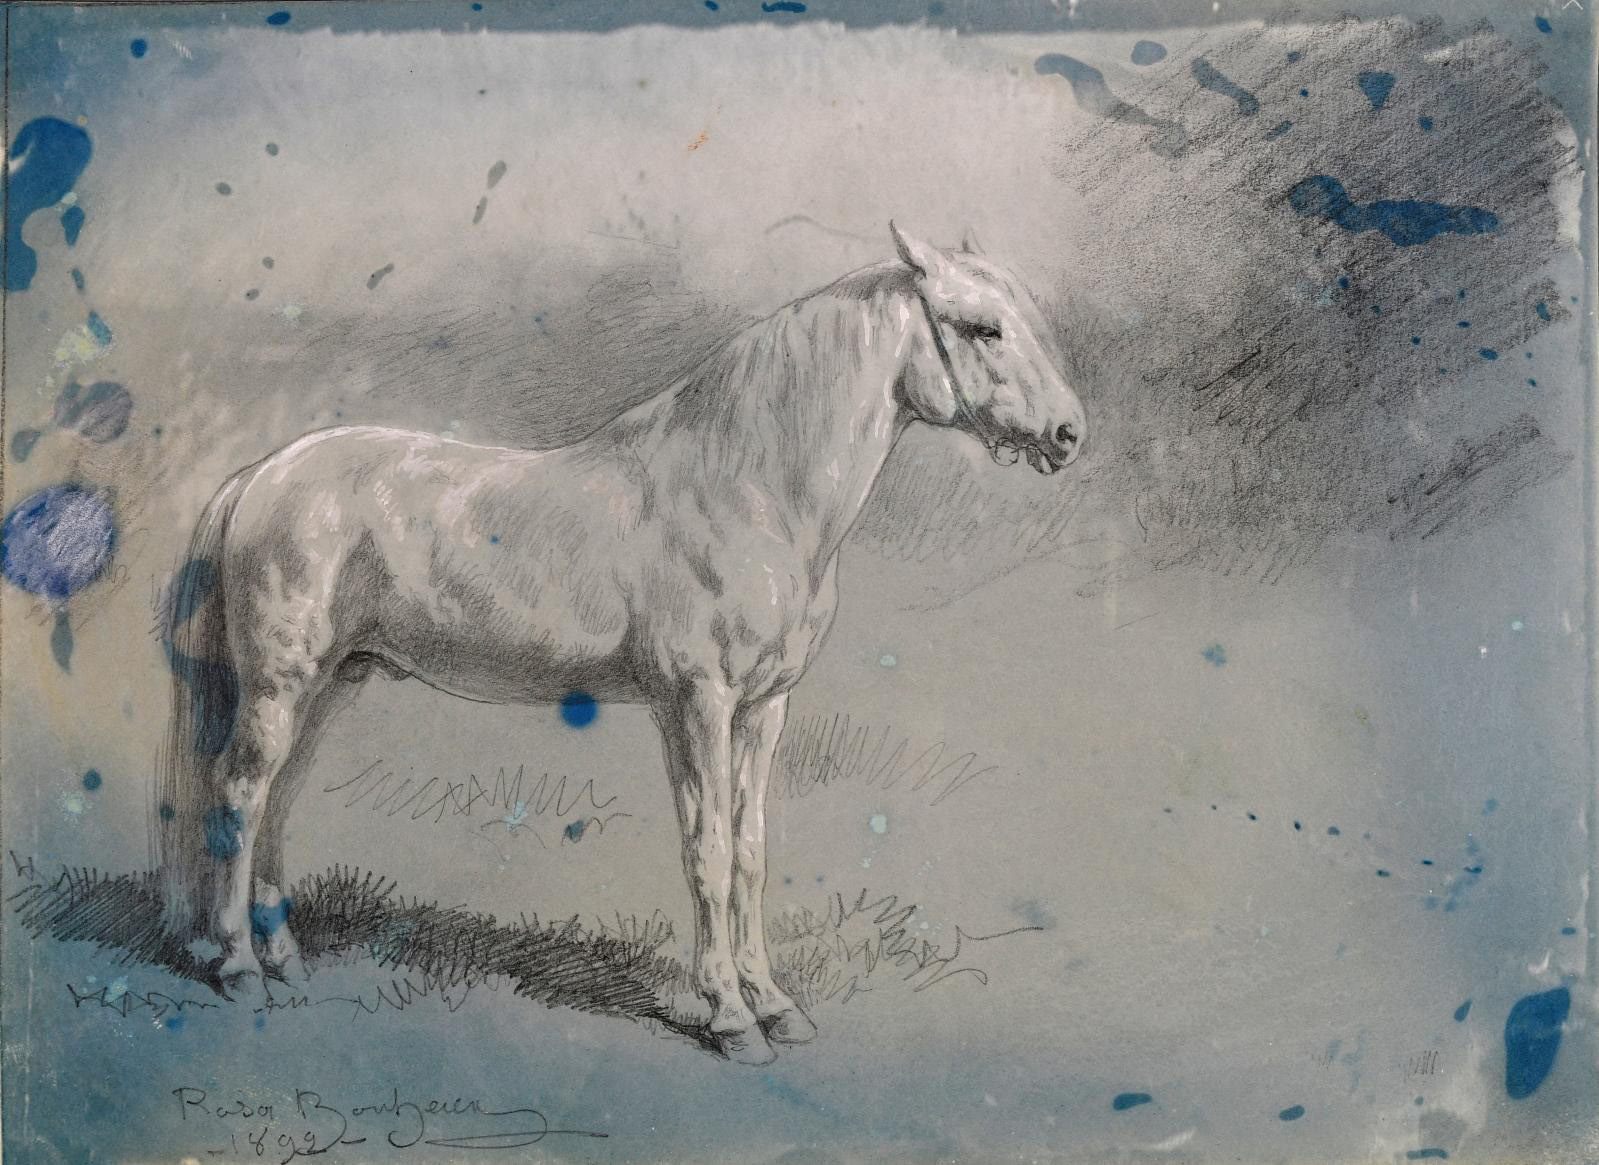 Rosa Bonheur (1822-1899), Cheval de profil droit (Horse in Right Profile), cyanotype highlighted with graphite and white gouache on vellum